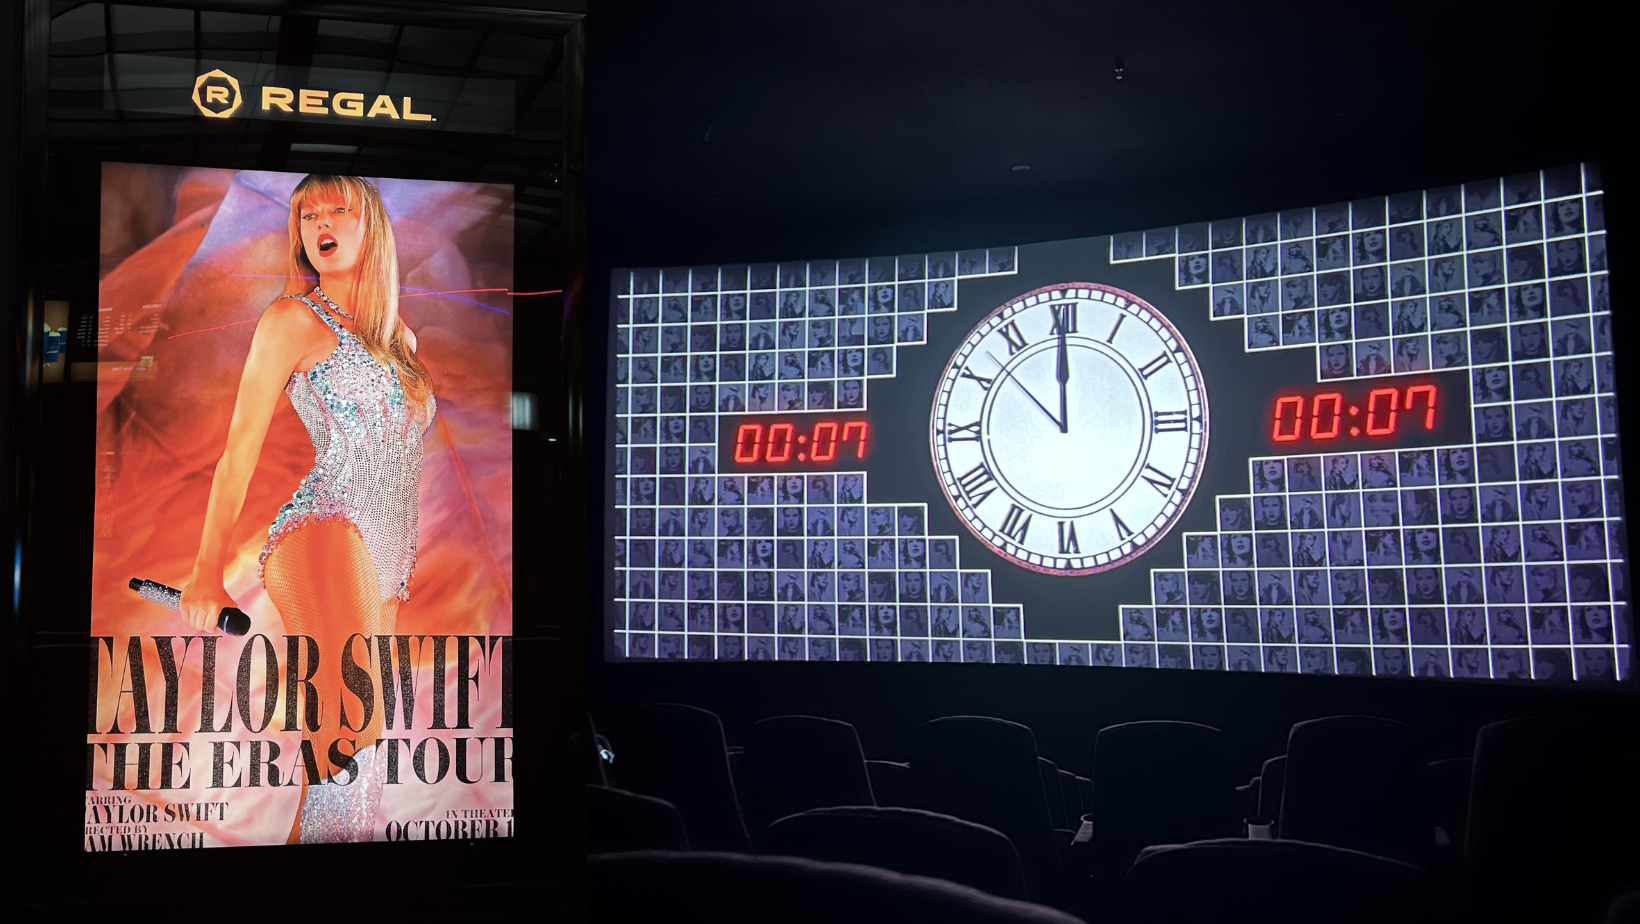 Before Swift comes on screen, a timer counts down to her grand entrance.